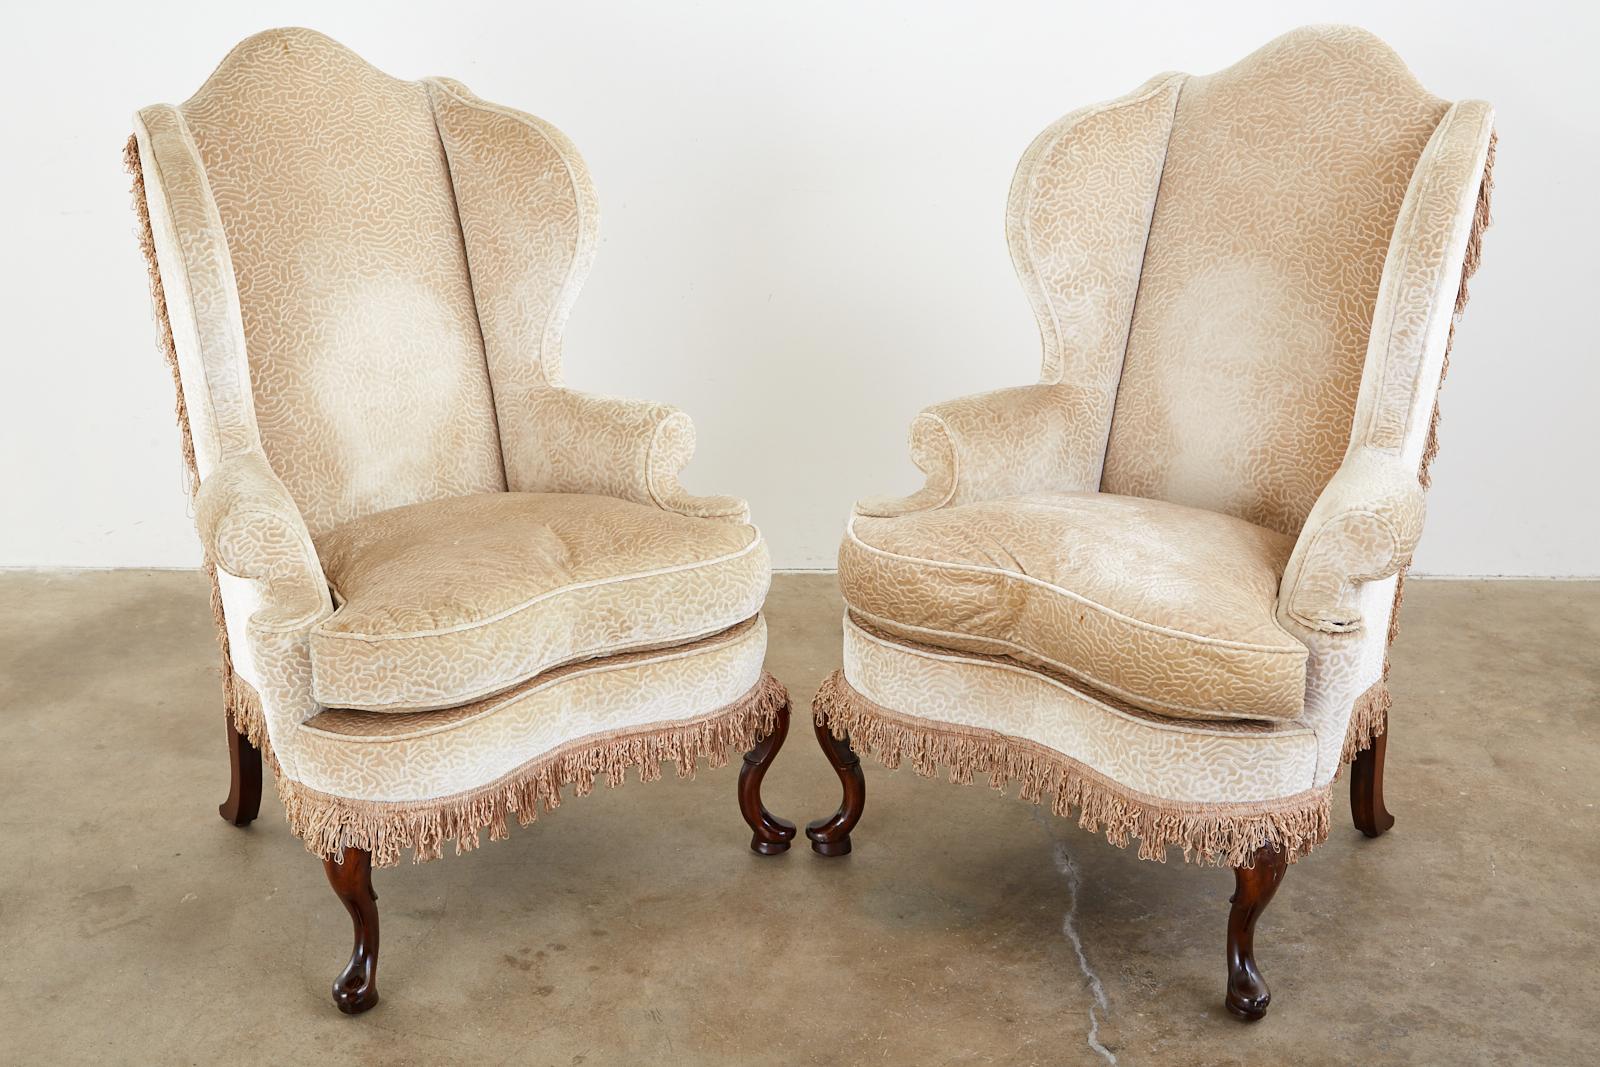 20th Century Pair of Queen Anne Style Wingback Chairs by Dunbar